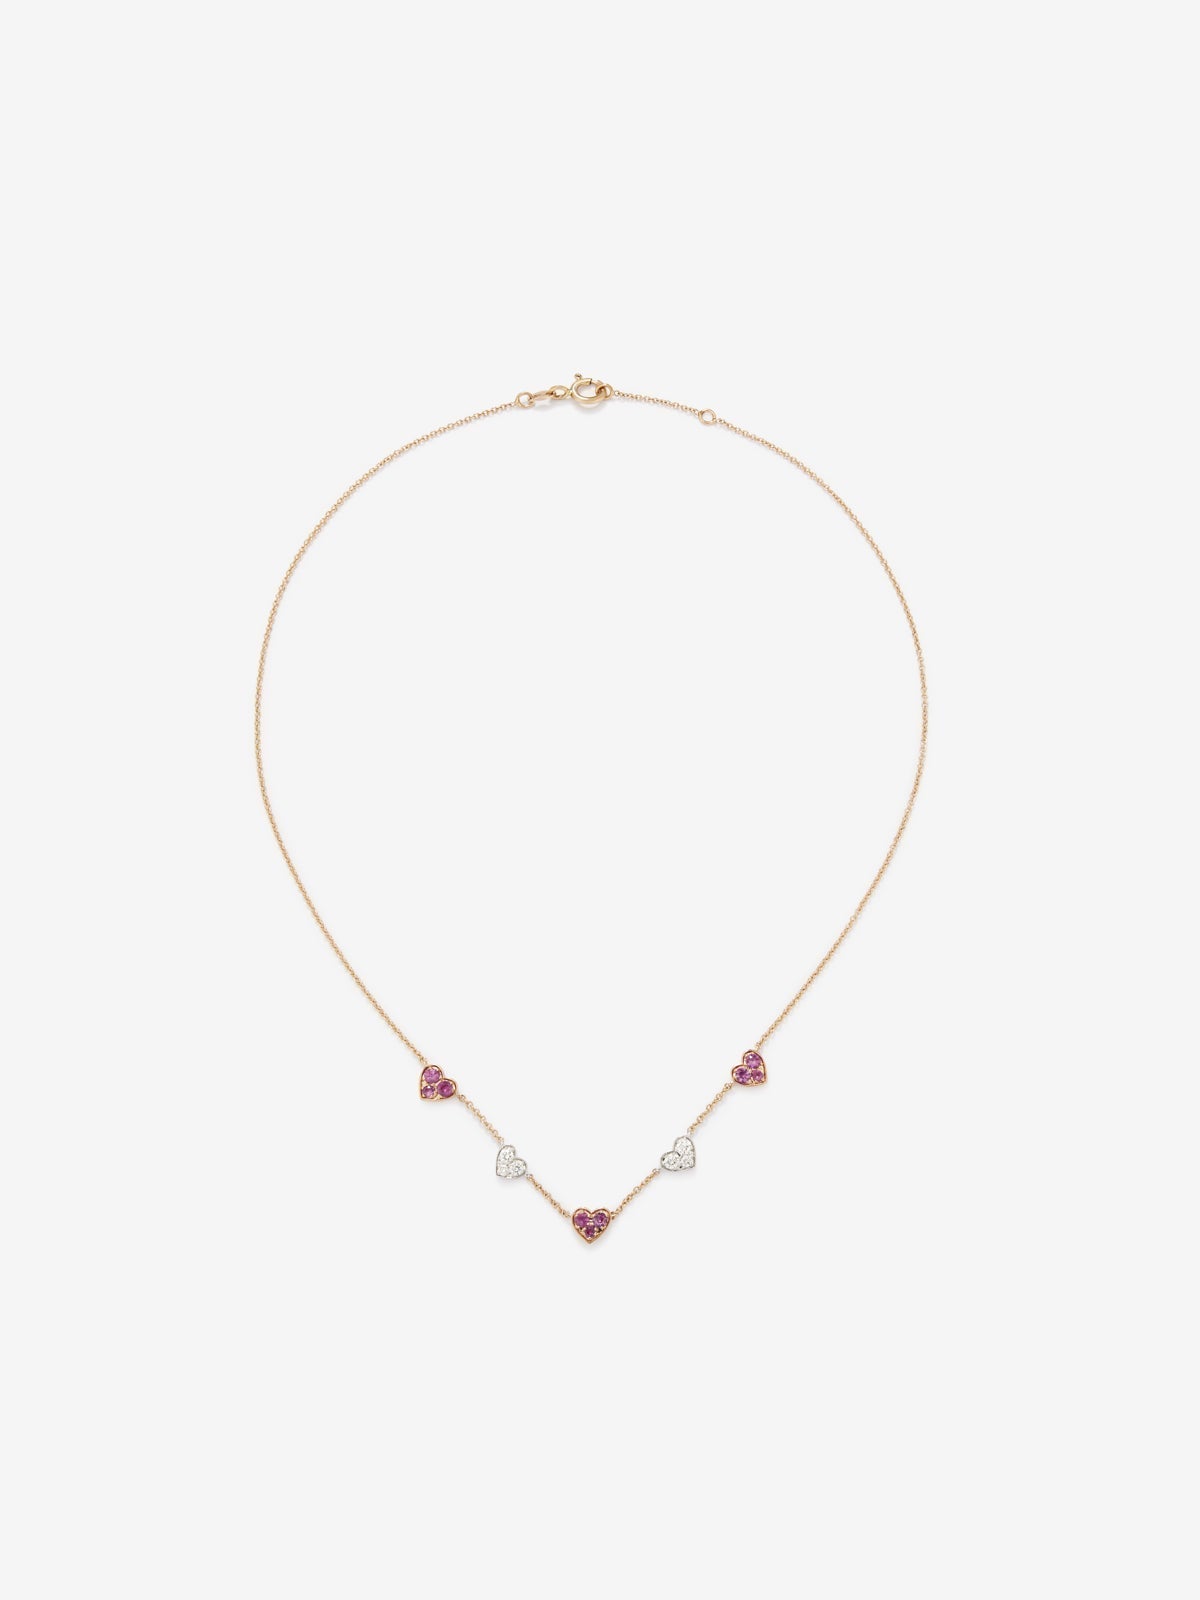 18kt Rose Gold and White Gold Heart Necklace with Pink Sapphires and Diamonds.